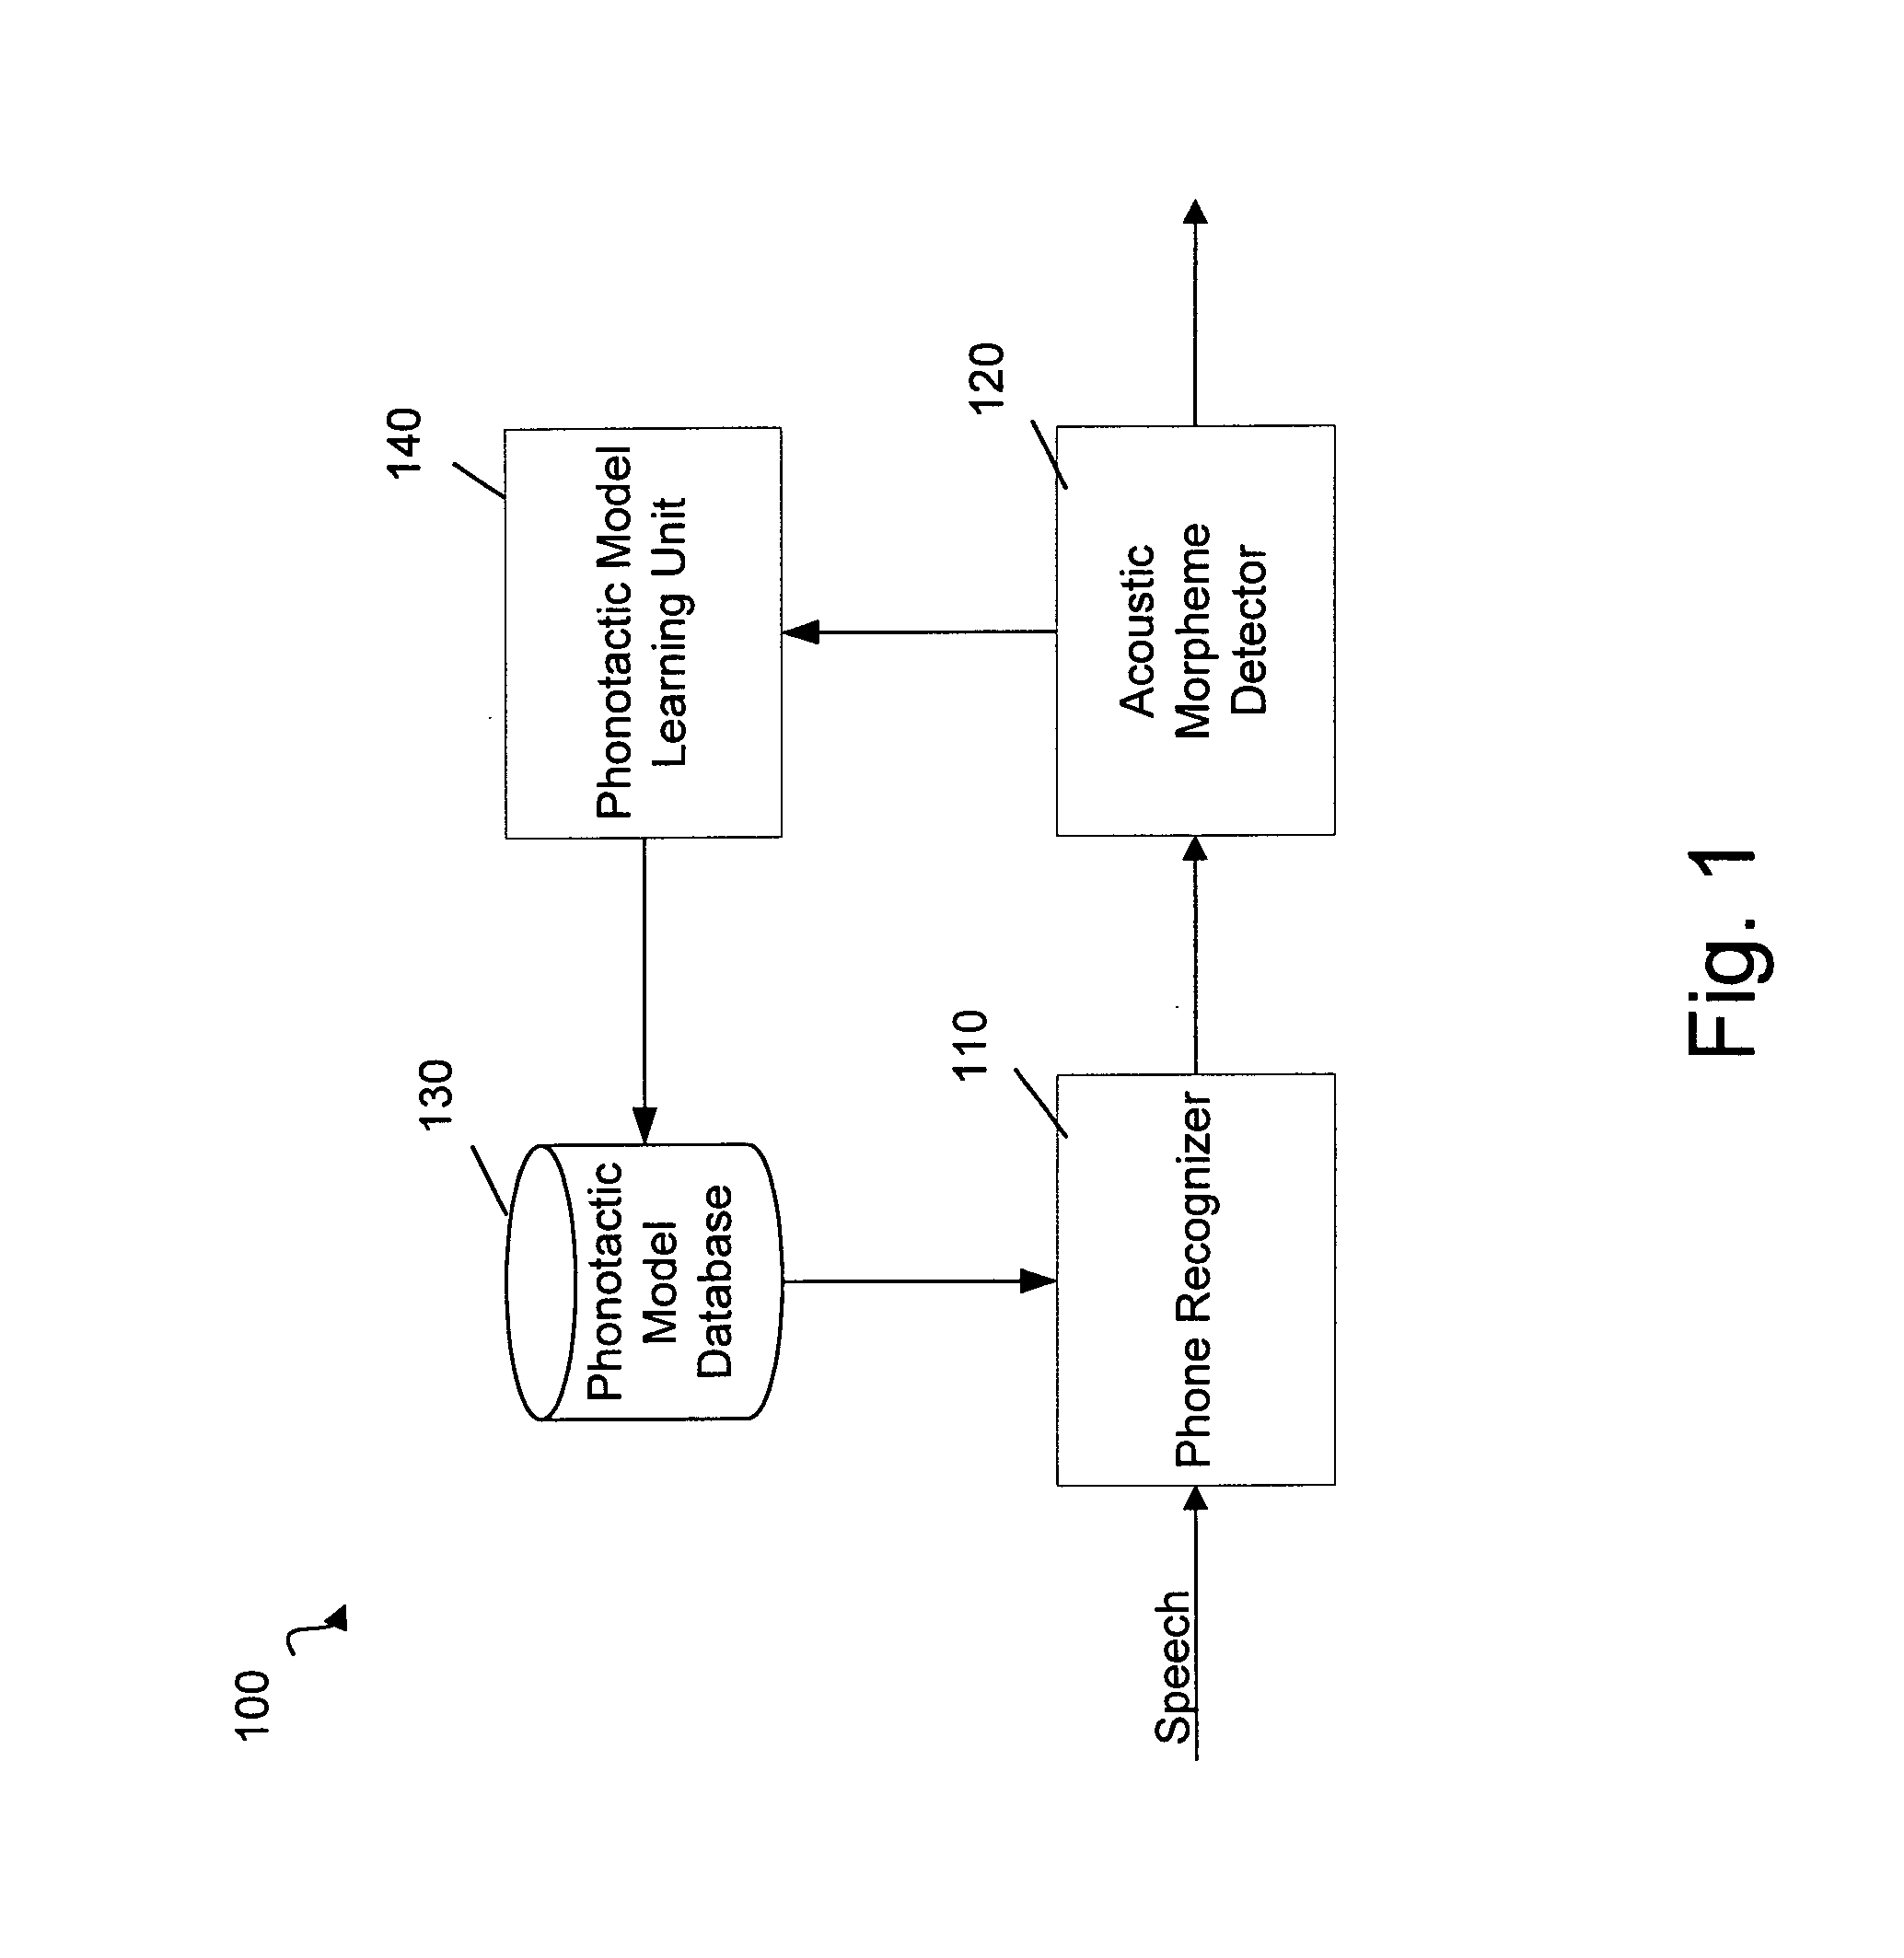 Method and System for Automatically Detecting Morphemes in a Task Classification System Using Lattices